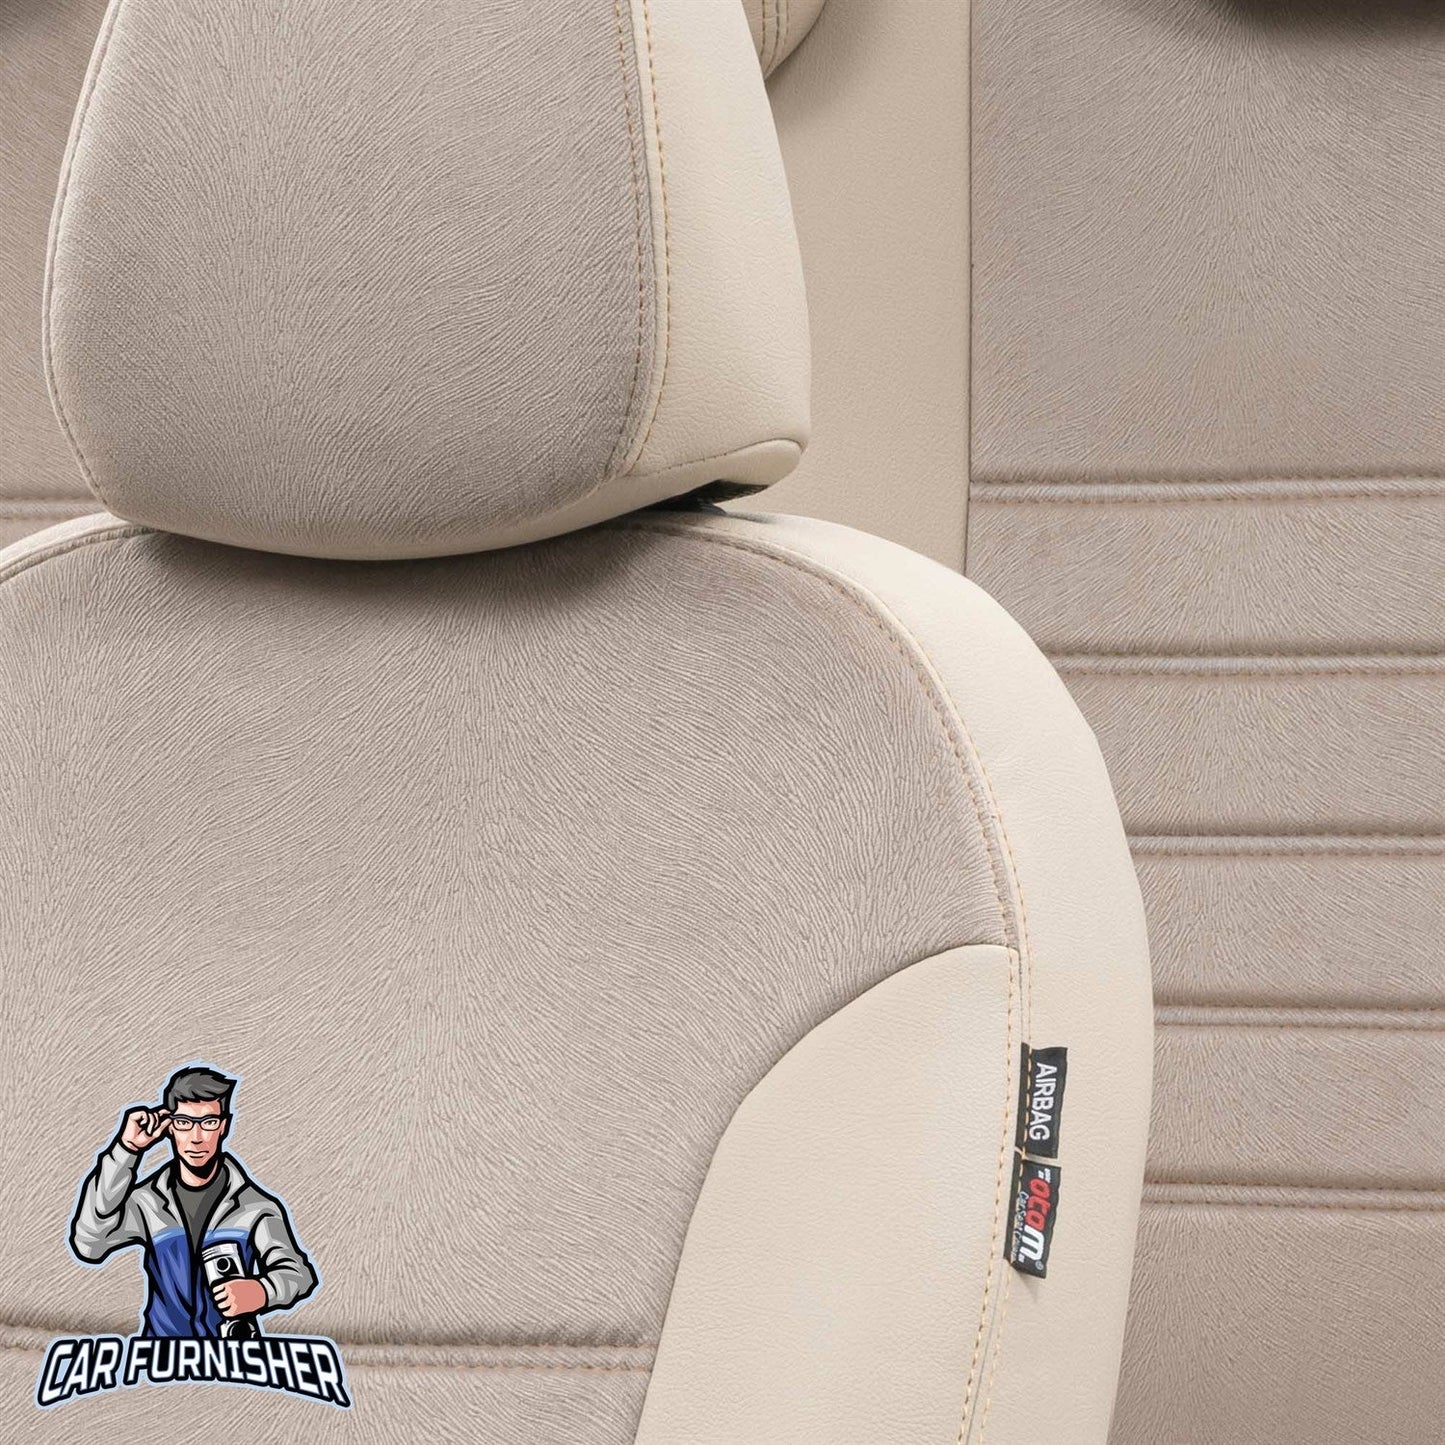 Smart ForFour Seat Covers London Foal Feather Design Beige Leather & Foal Feather